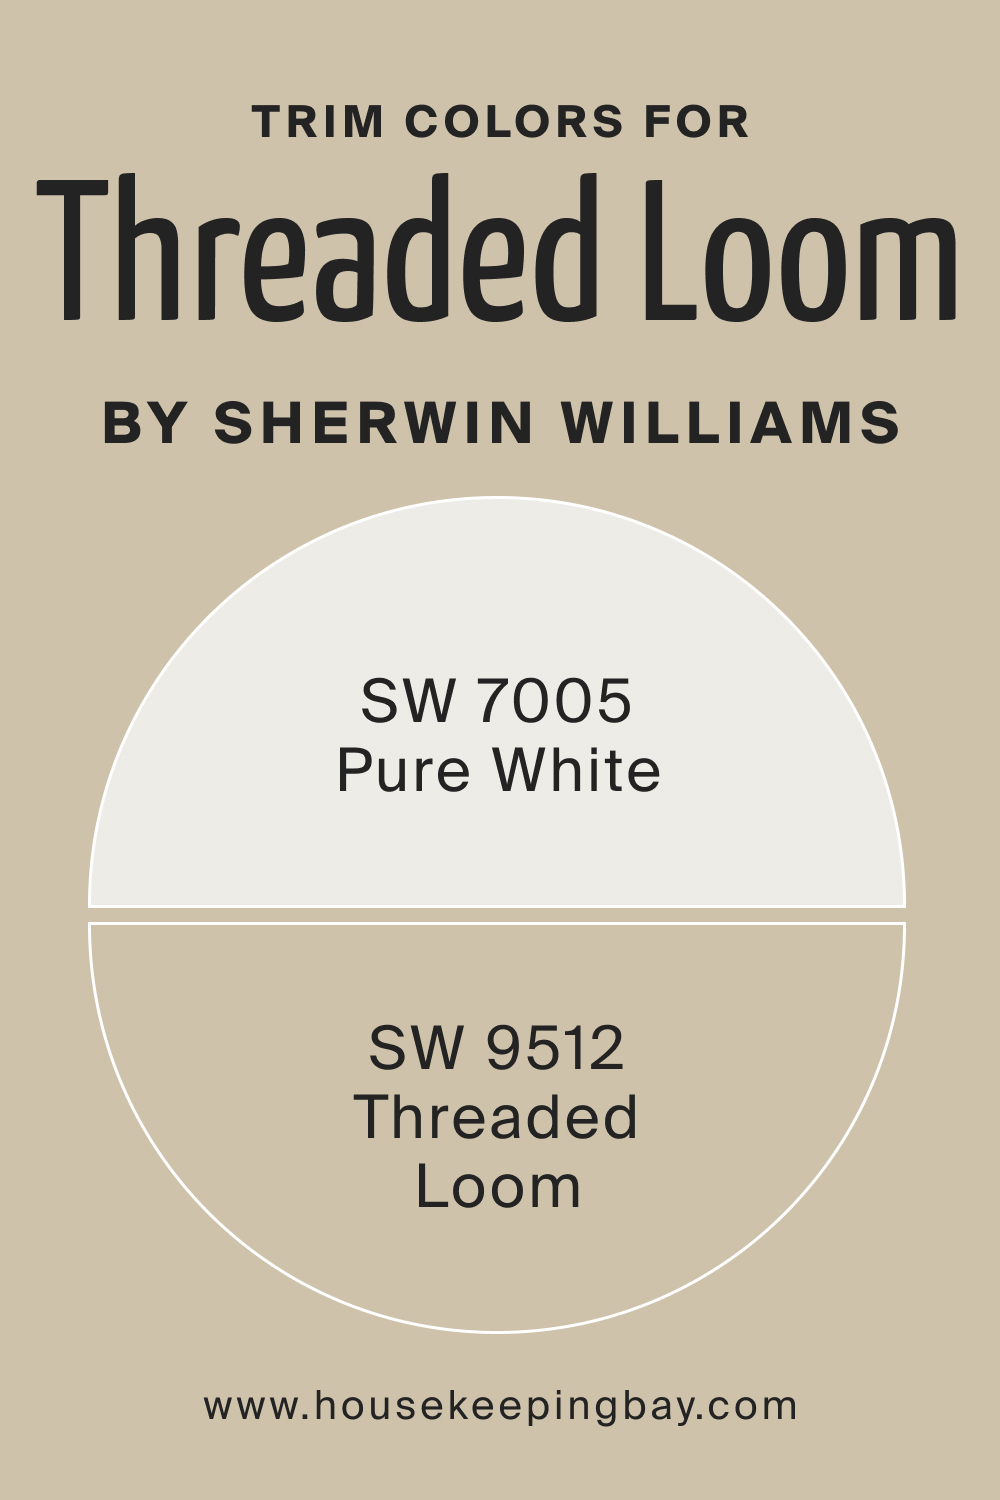 Trim Colors of SW 9512 Threaded Loom by Sherwin Williams